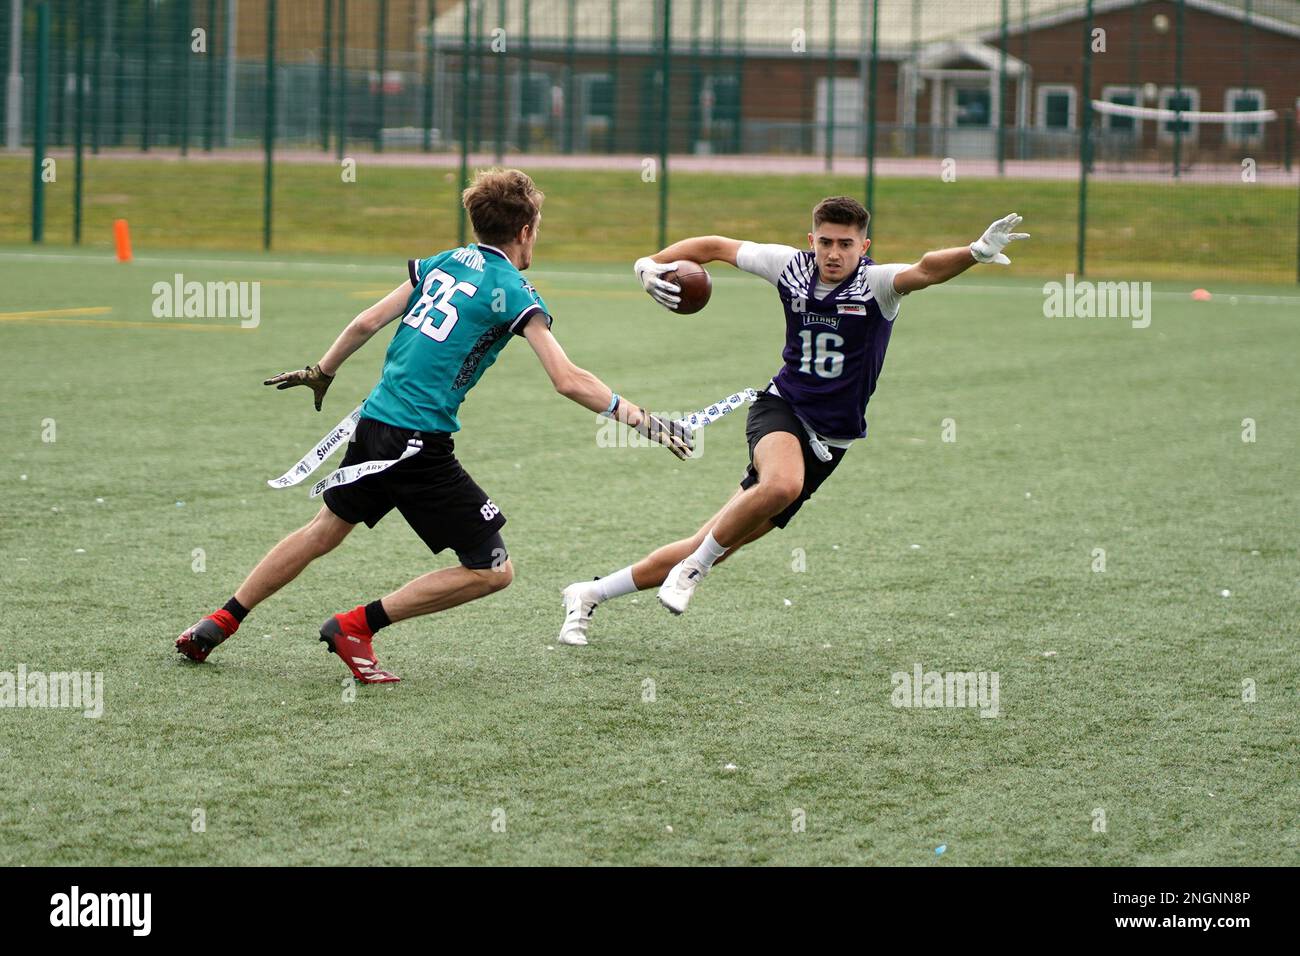 Players running with the ball during a Flag Football game in Wales. Stock Photo